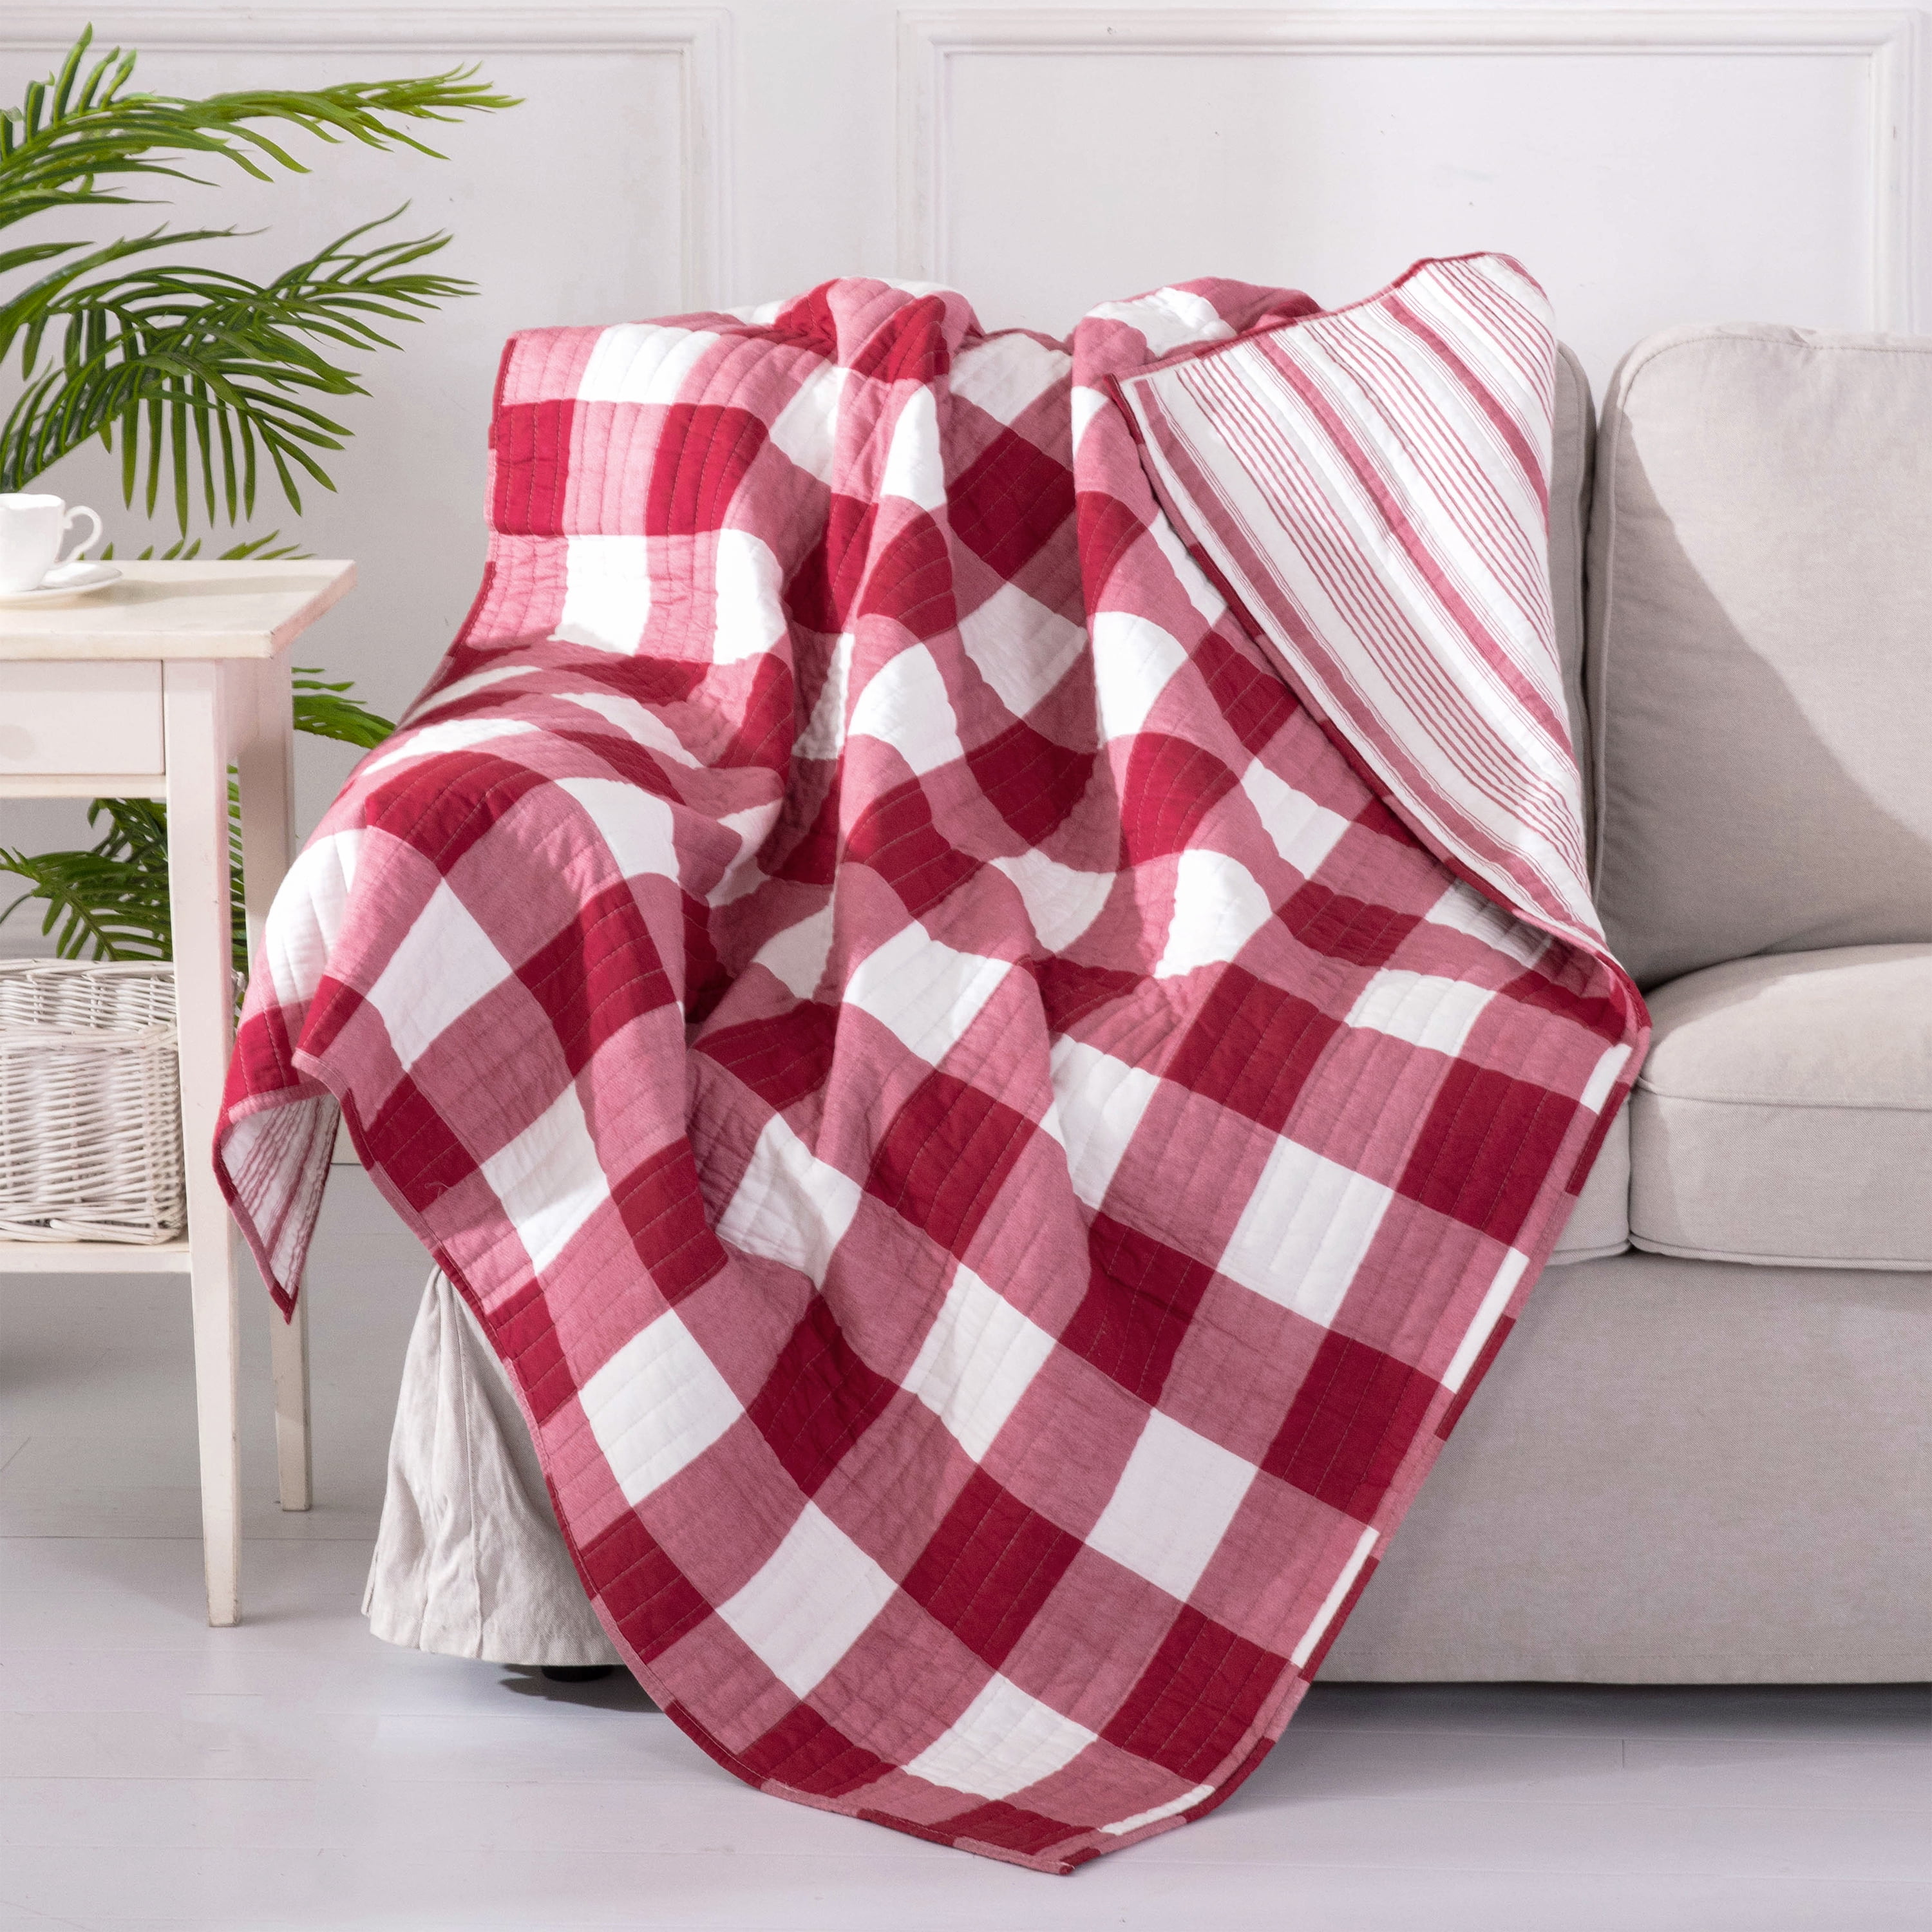 Cozy 100% Cotton Red Gingham Check reverse to Black Quilted Throw Blanket 50x70" 